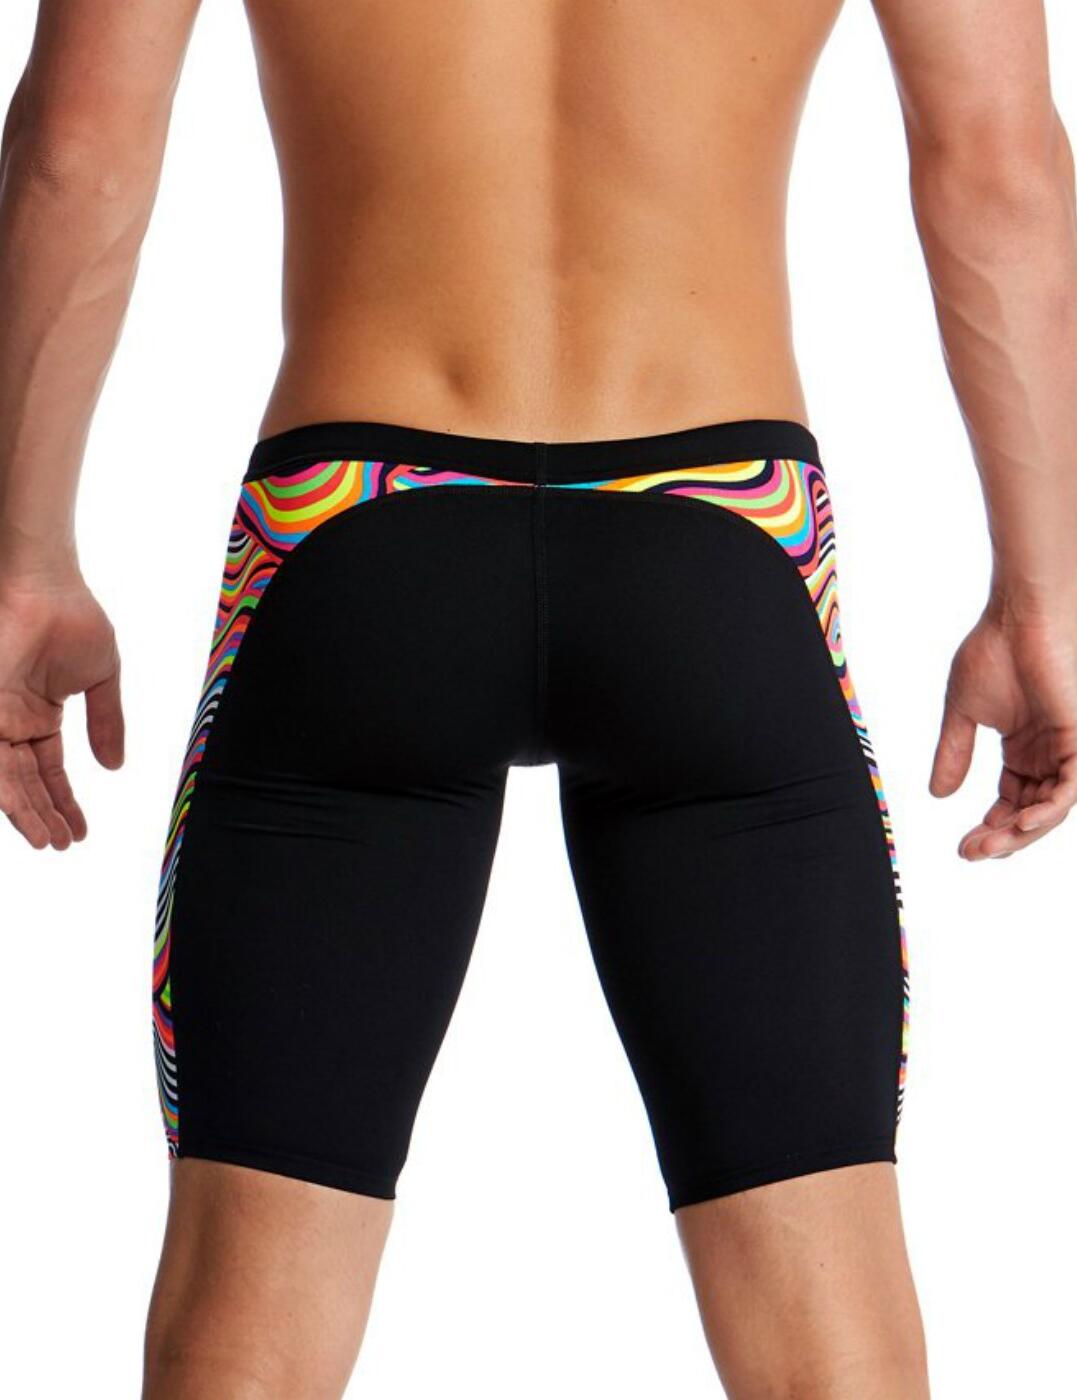 Funky Trunks Mens Dripping Training Jammers - Belle Lingerie | Funky ...